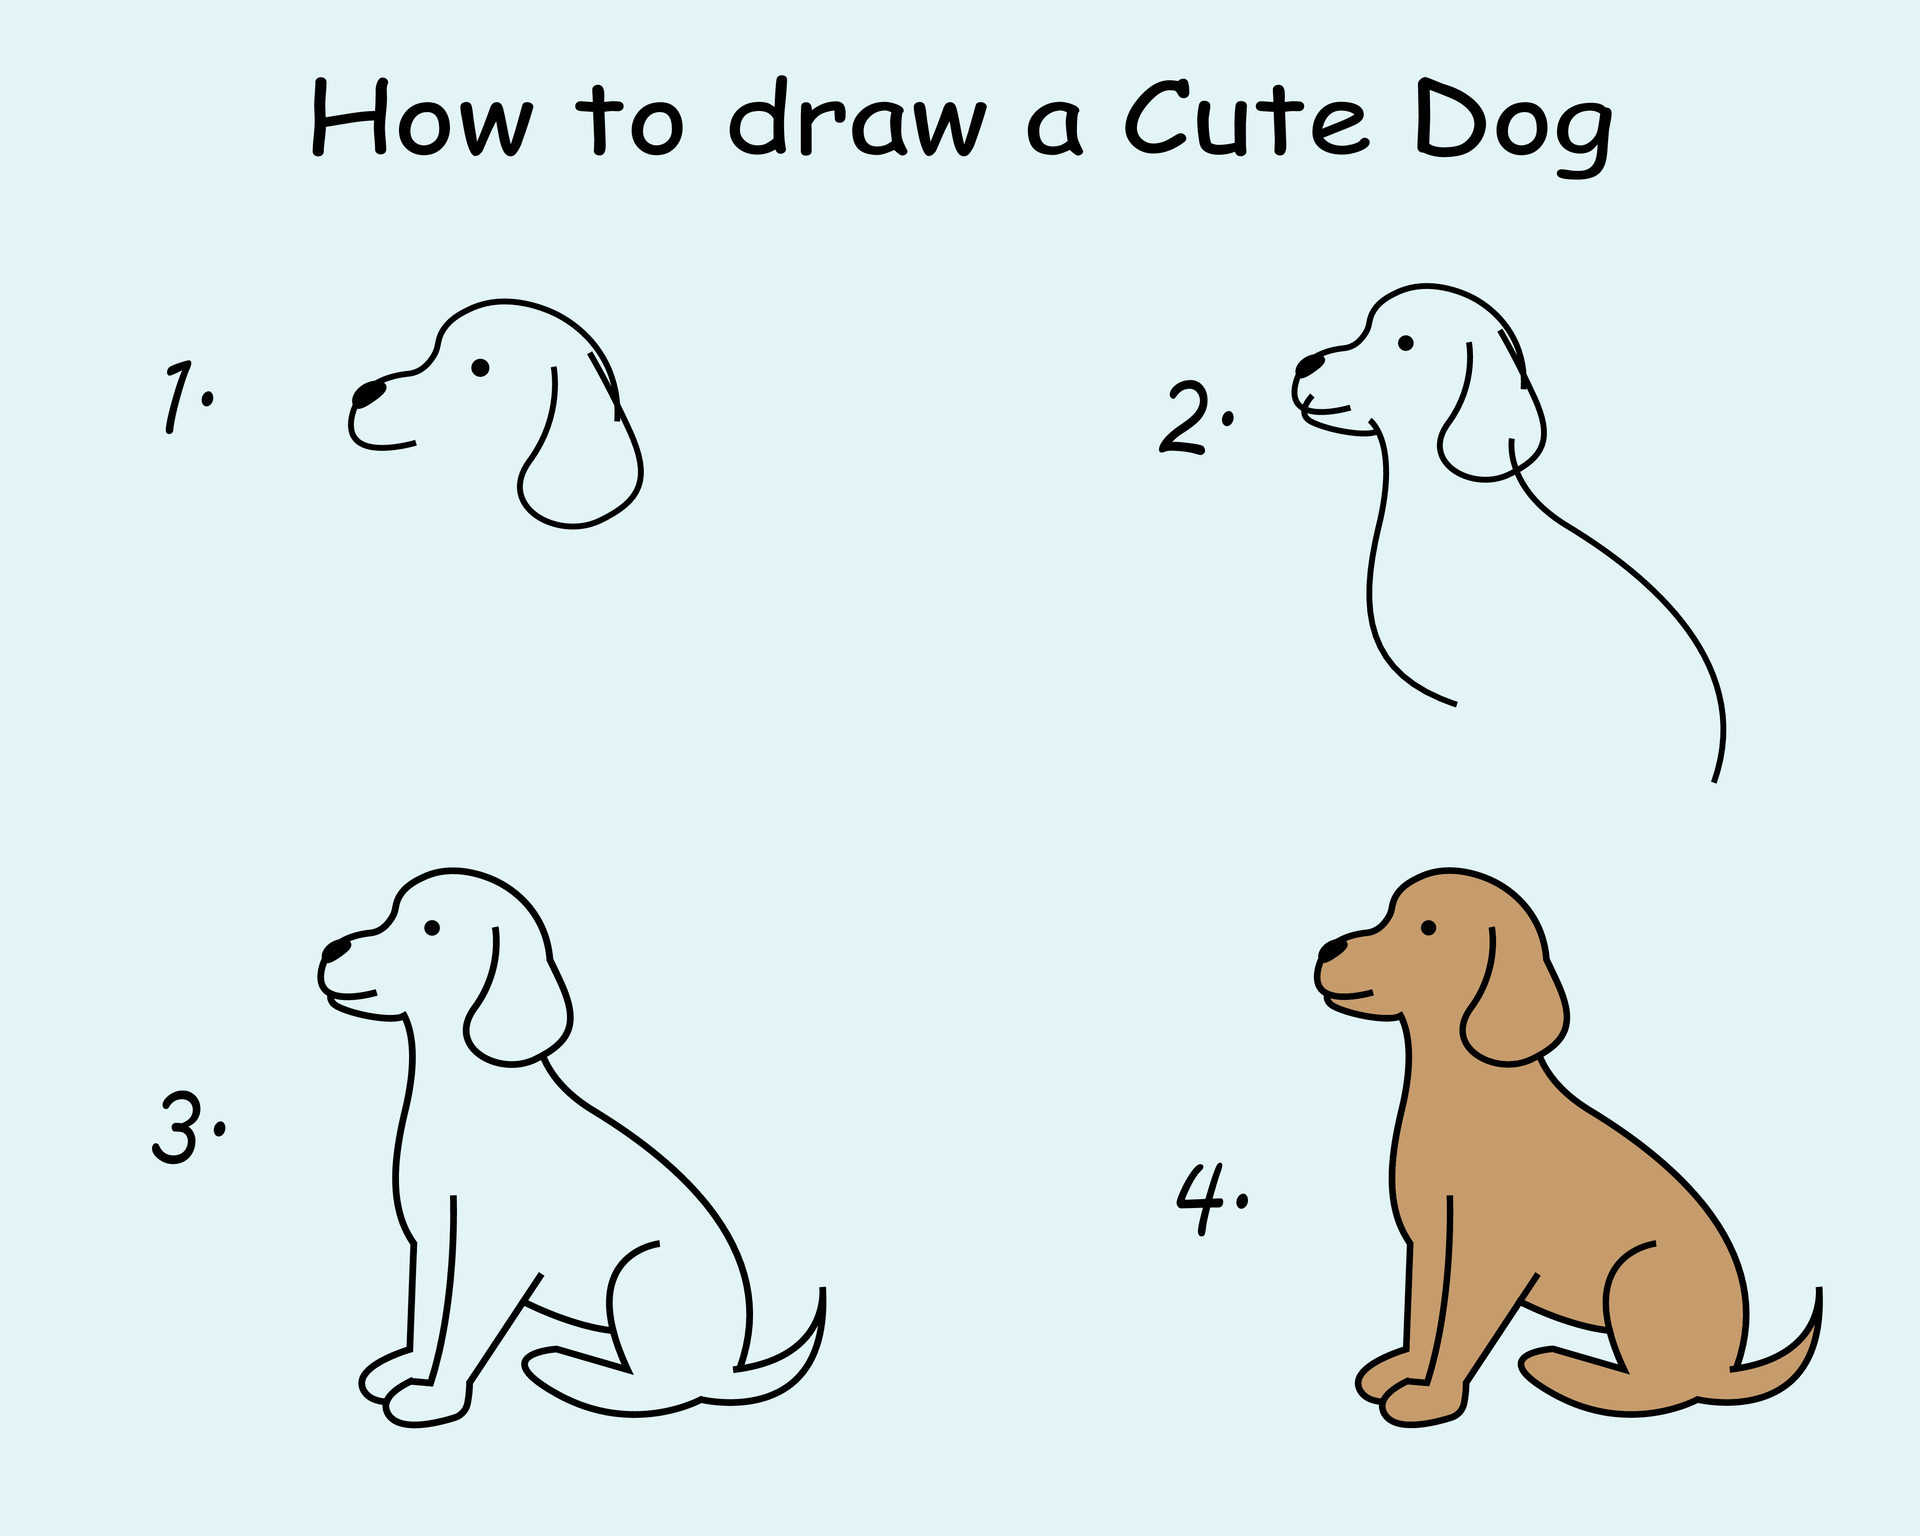 https://static.vecteezy.com/system/resources/previews/027/574/970/original/step-by-step-to-draw-a-dog-drawing-tutorial-a-dog-drawing-lesson-for-children-illustration-free-vector.jpg